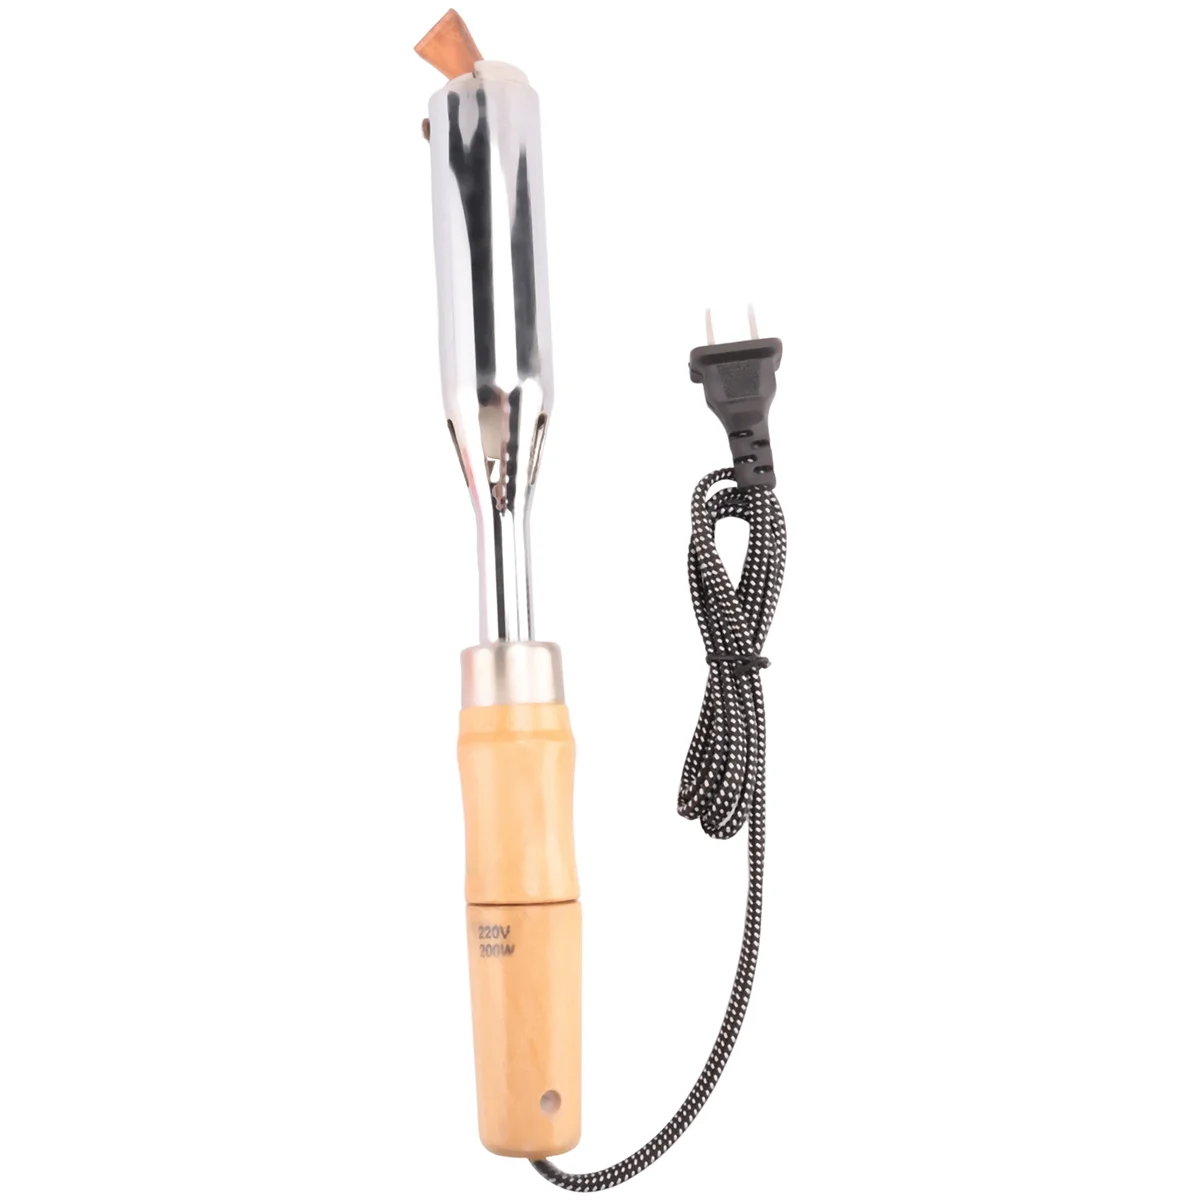 

200W insulated wooden handle electric iron high power soldering iron Household electrician welding electric iron iron soldering